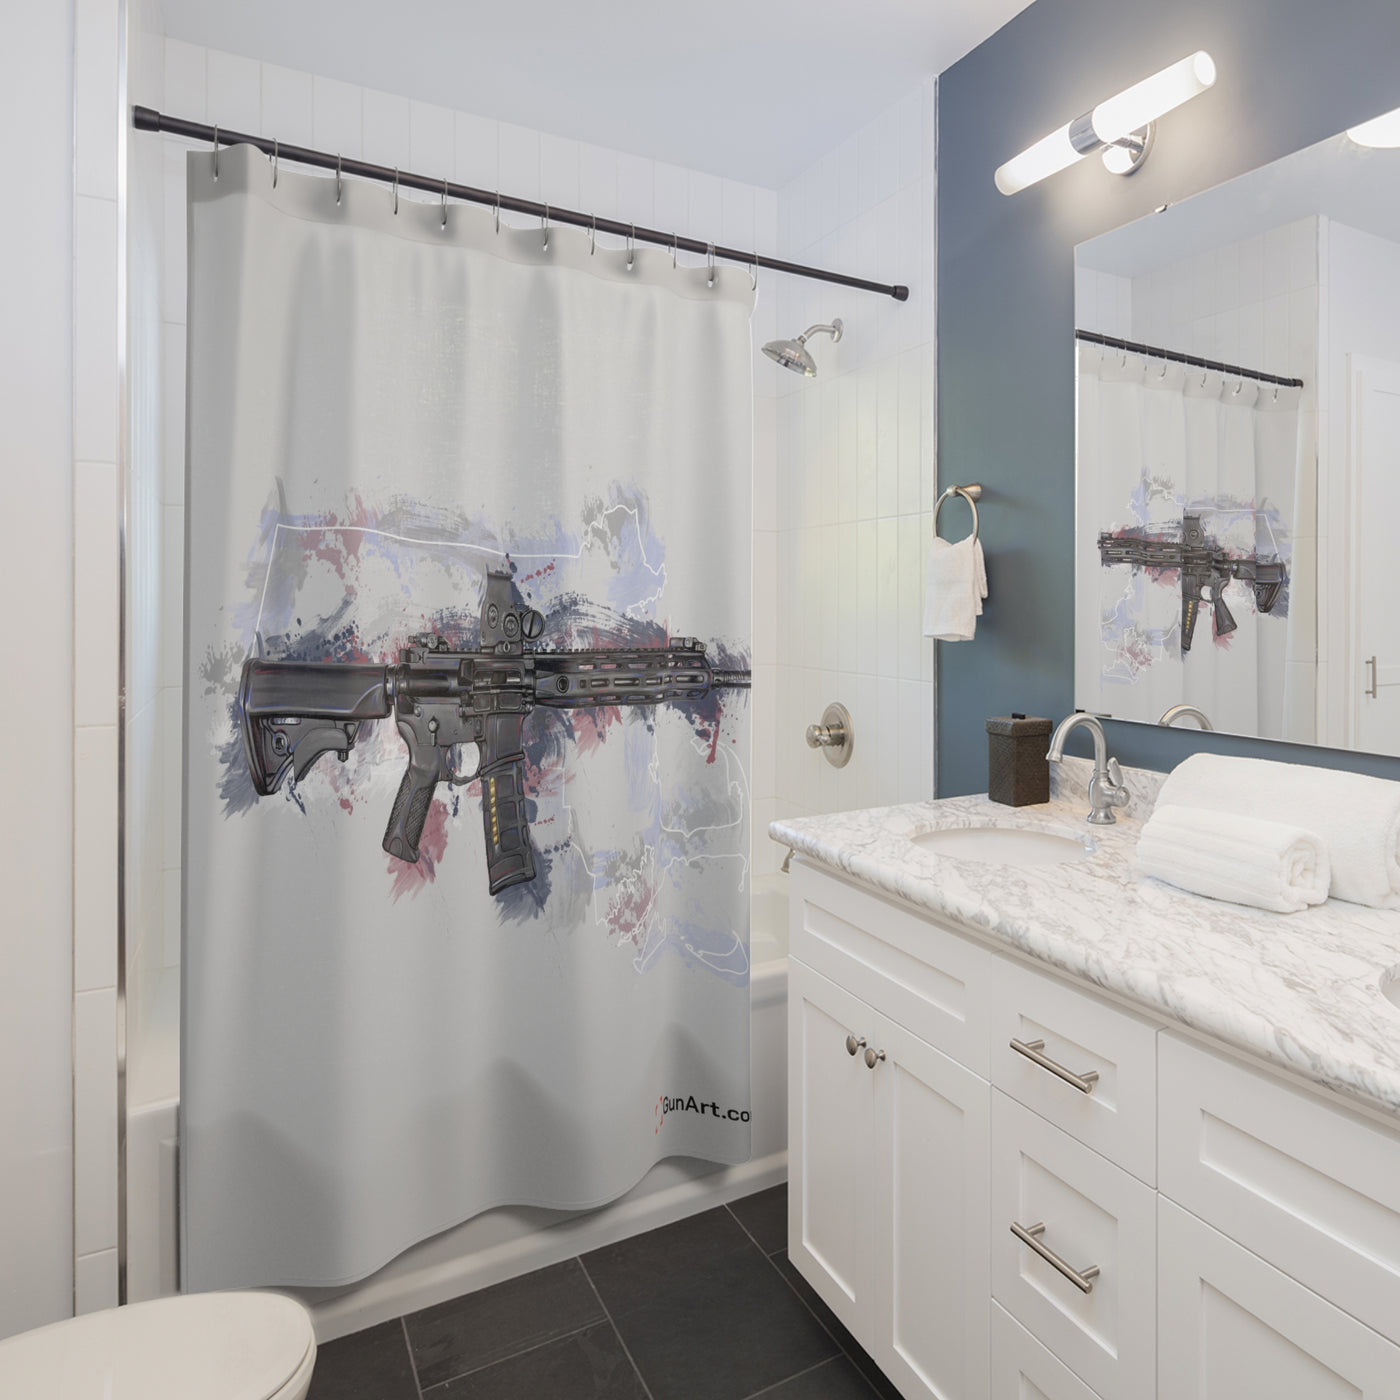 Defending Freedom - Massachussetts - AR-15 State Shower Curtains - White State